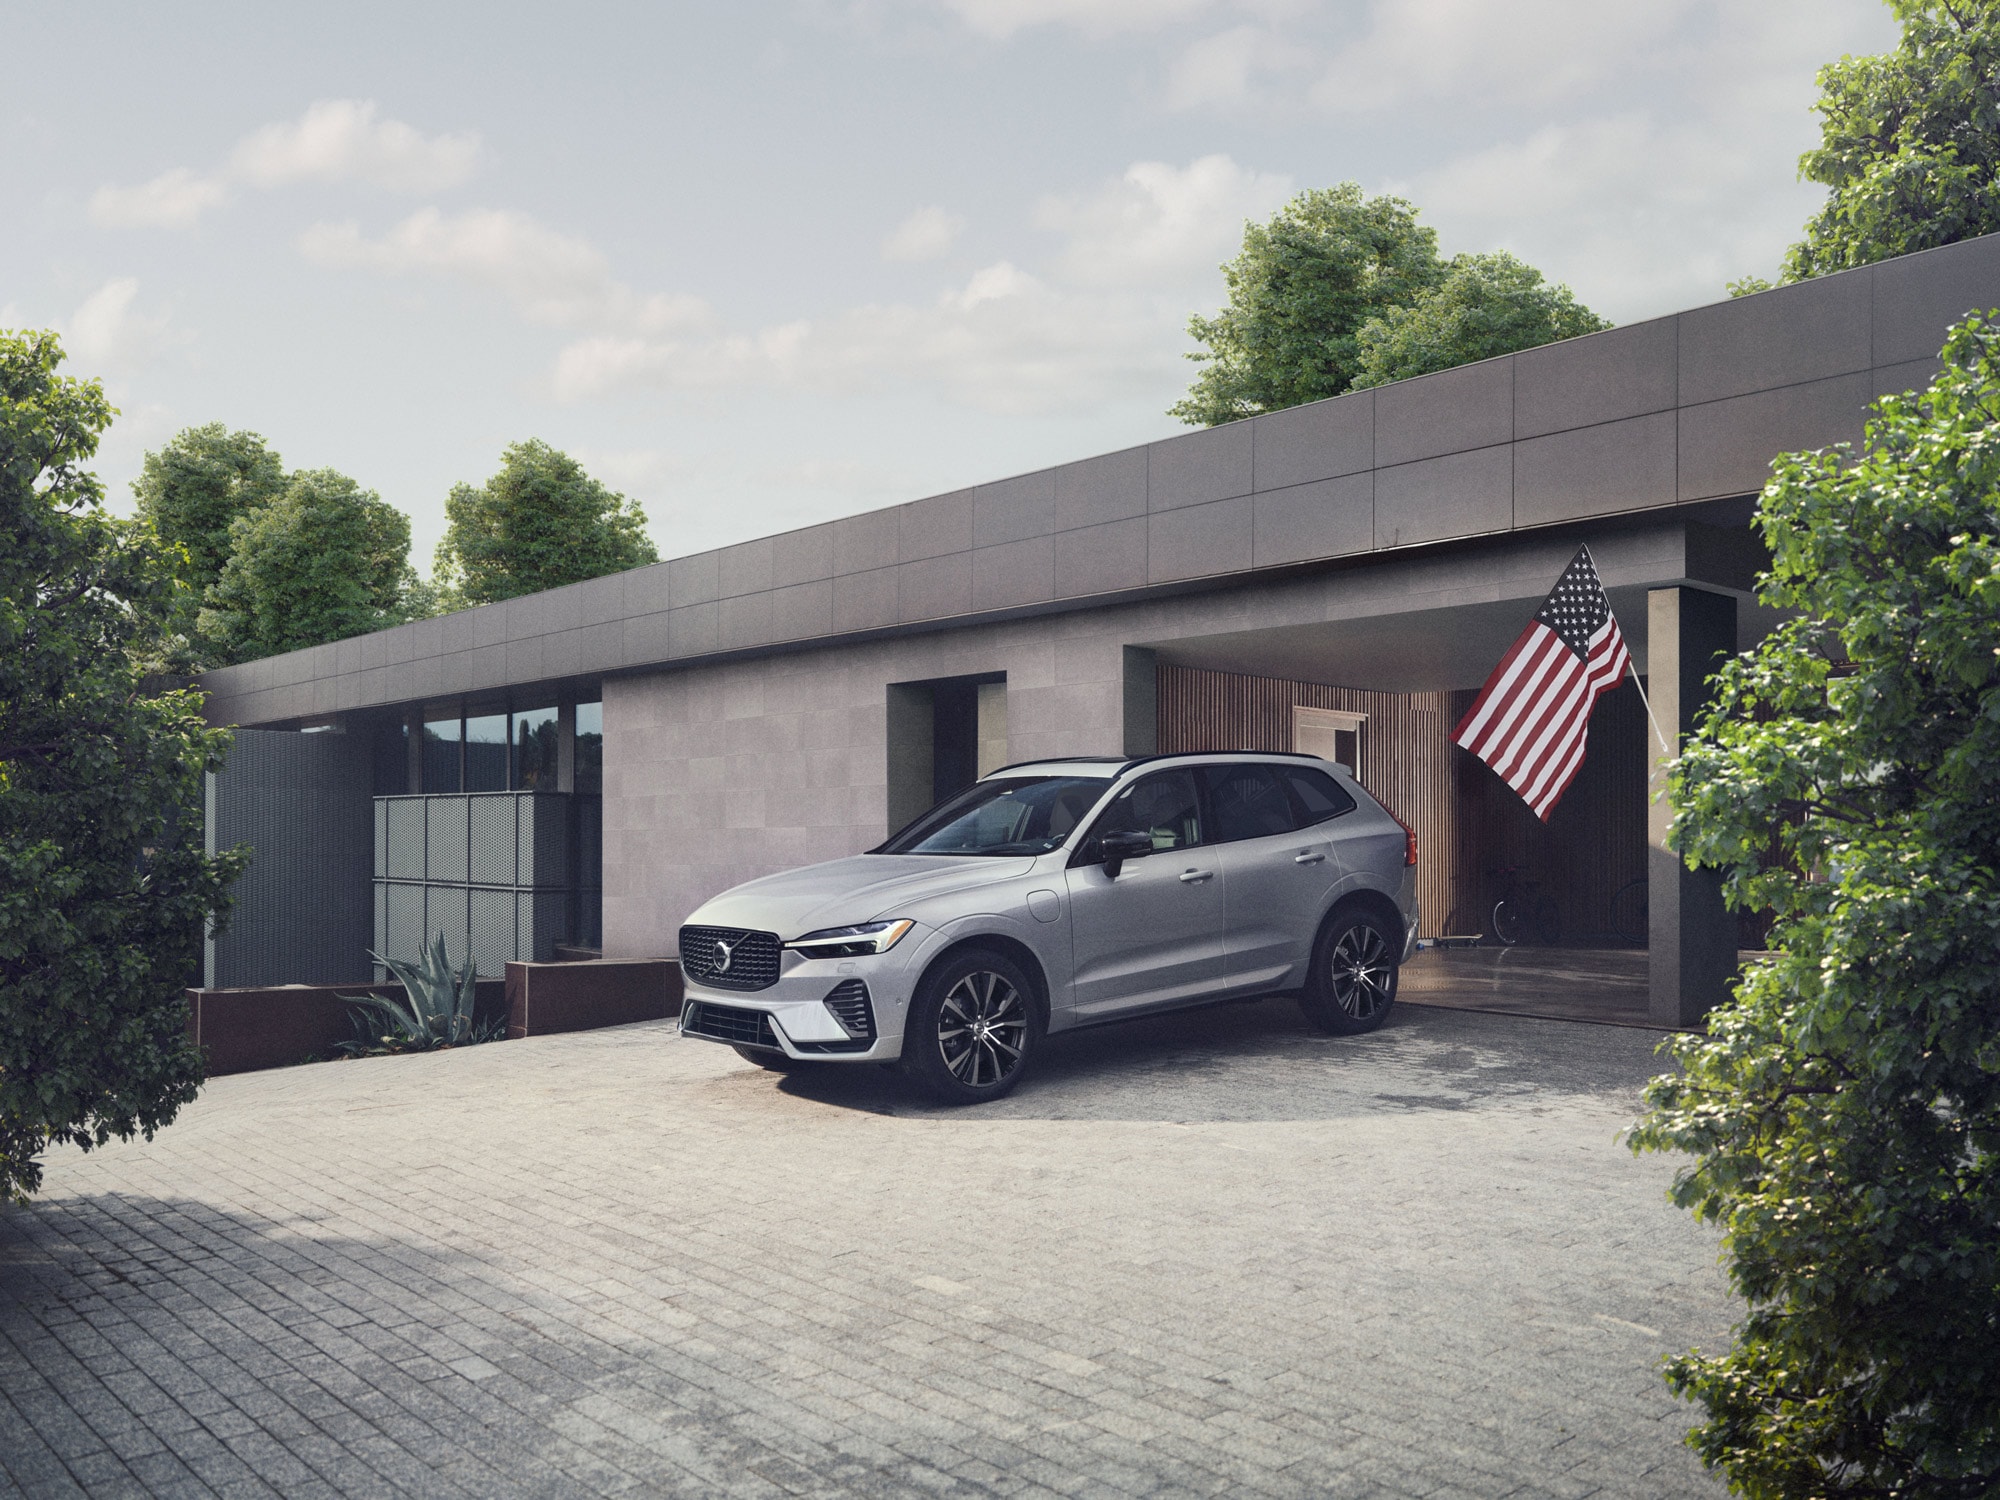 Stationed in the US Military Volvo Program - Volvo in front of house with USA flag